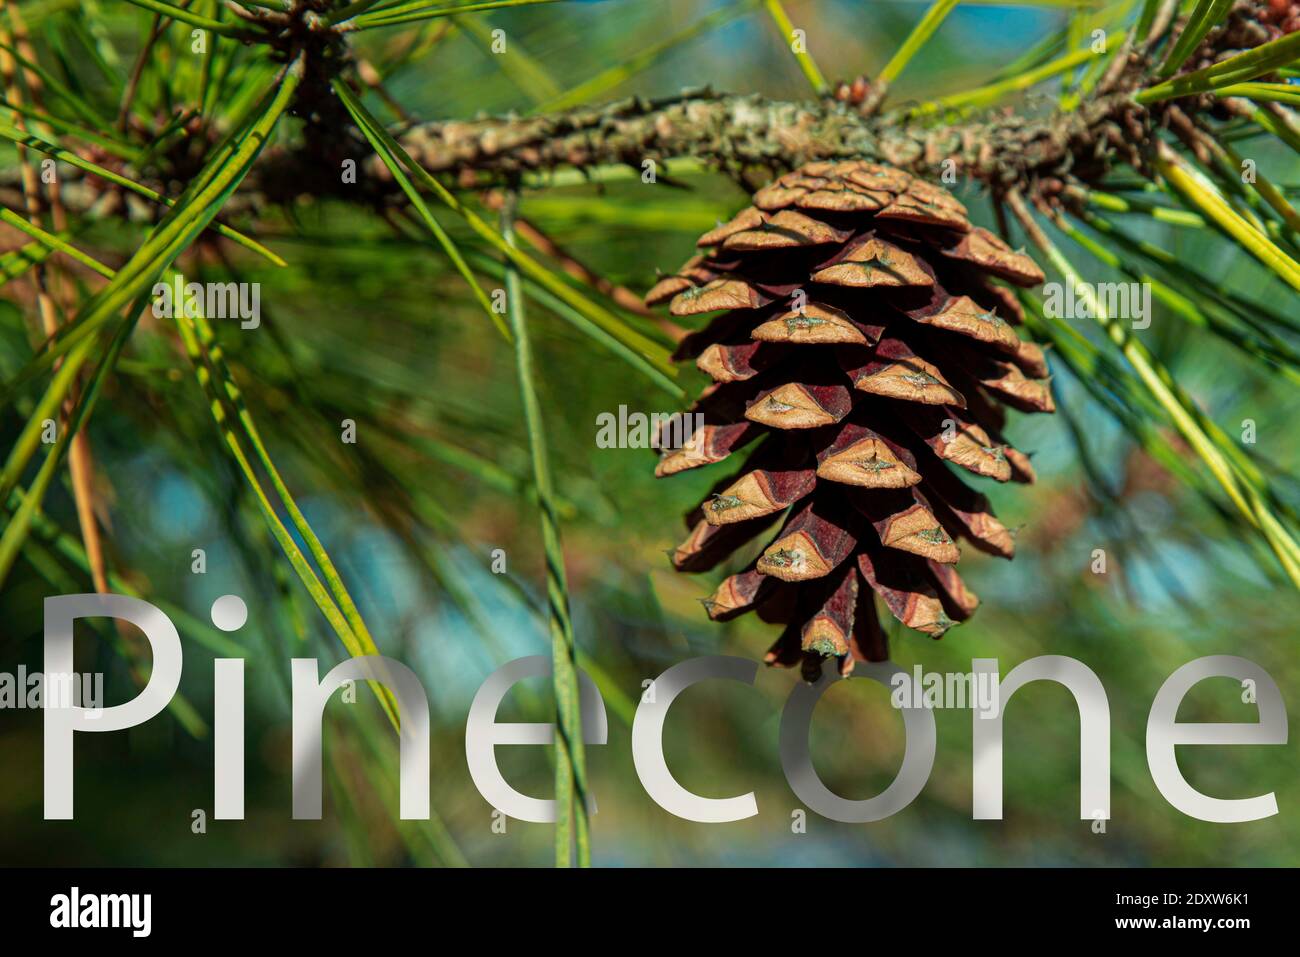 Close up image of opening pine cone and pine tree needles with graphic image of word imposed on the image Stock Photo